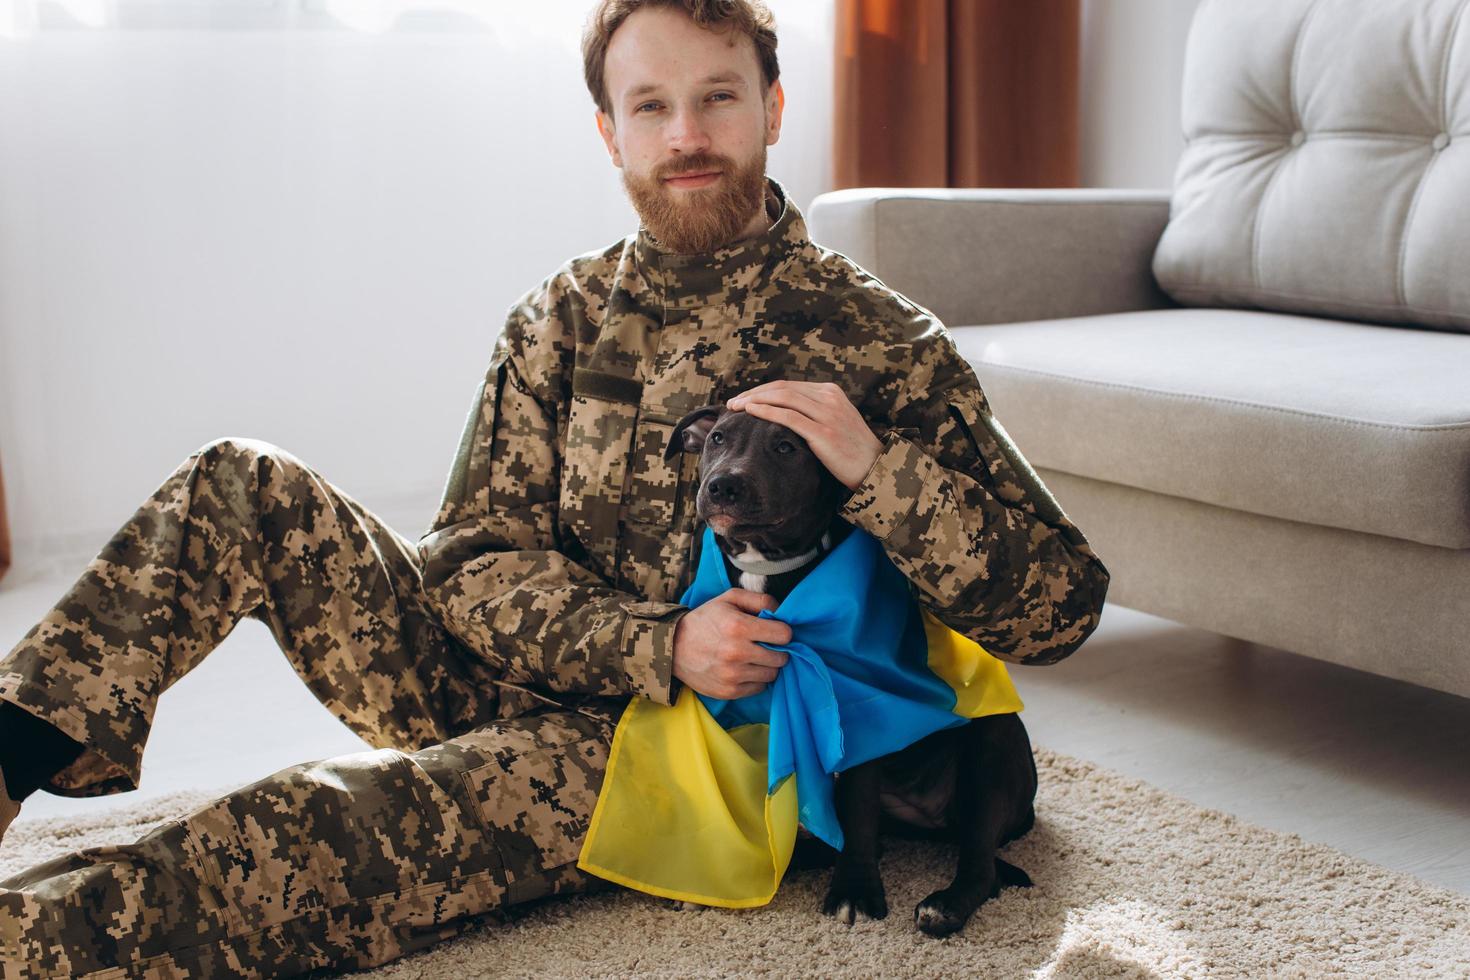 Ukrainian soldier hugging and wrapping his faithful friend's Ukrainian flag around an Amstaff dog in the office photo